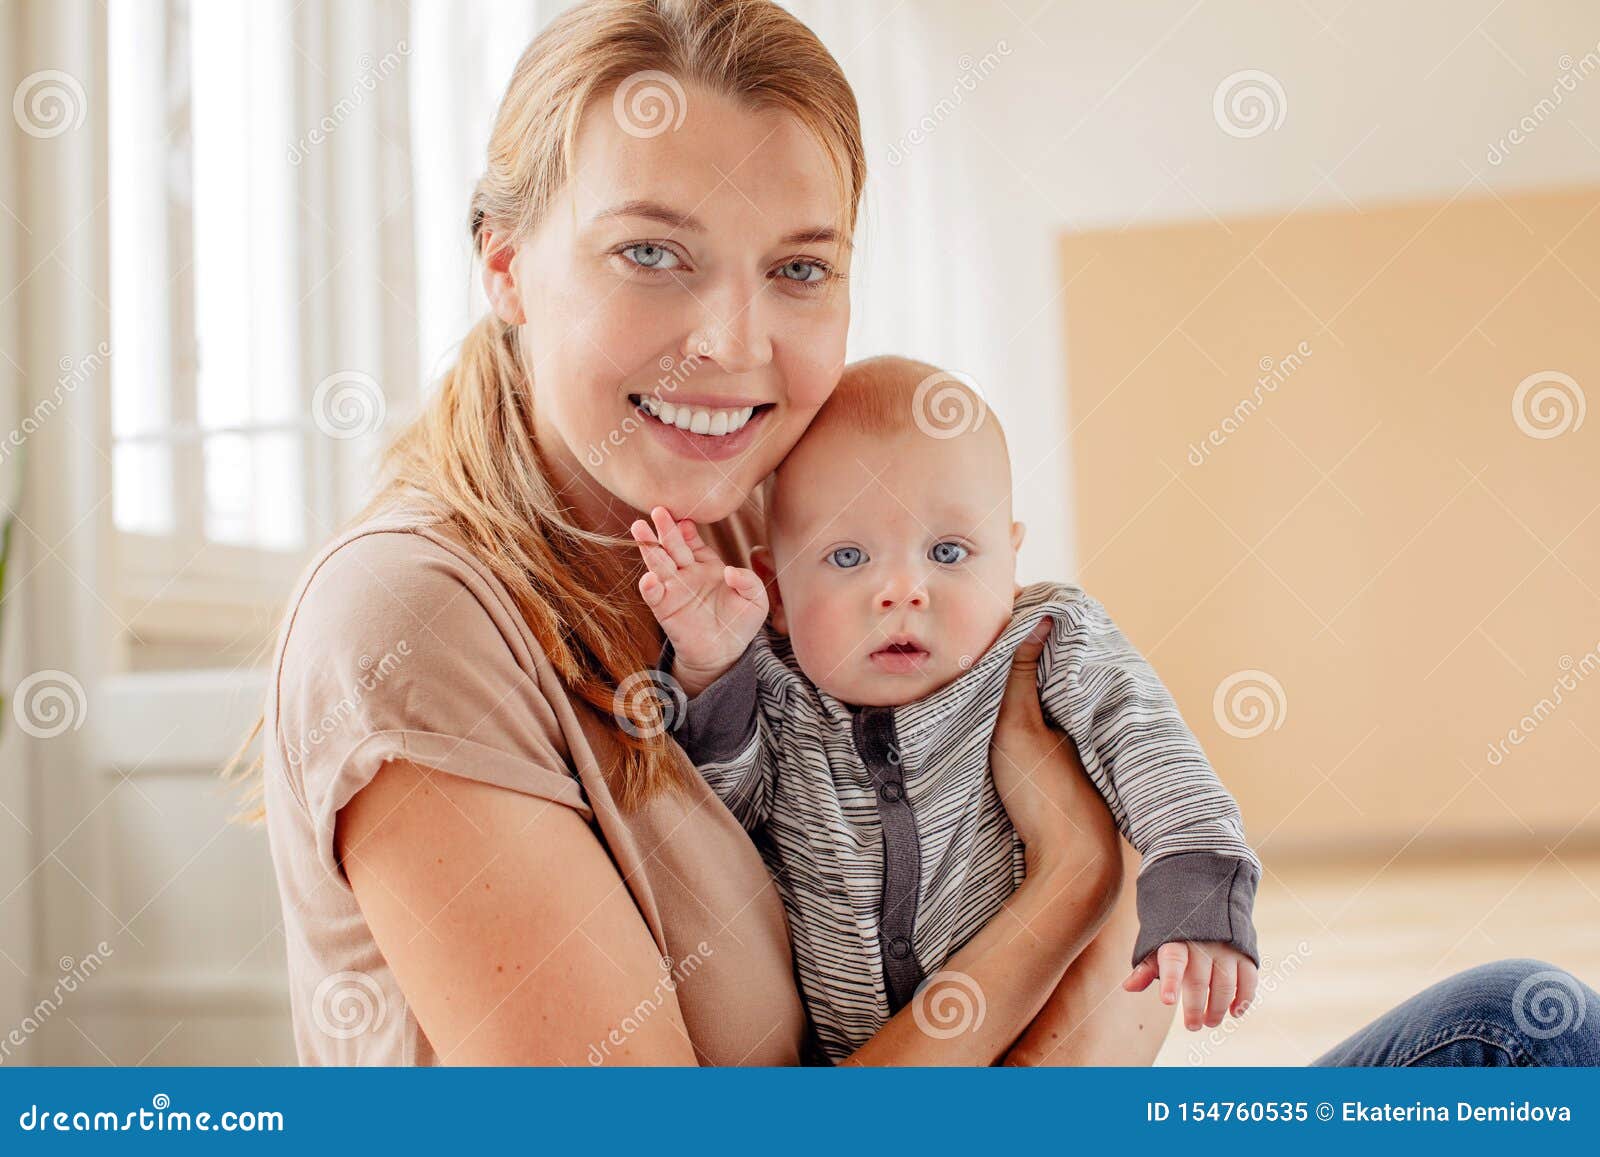 Happy Mother With Newborn Baby Stock Image Image Of Newborn Little